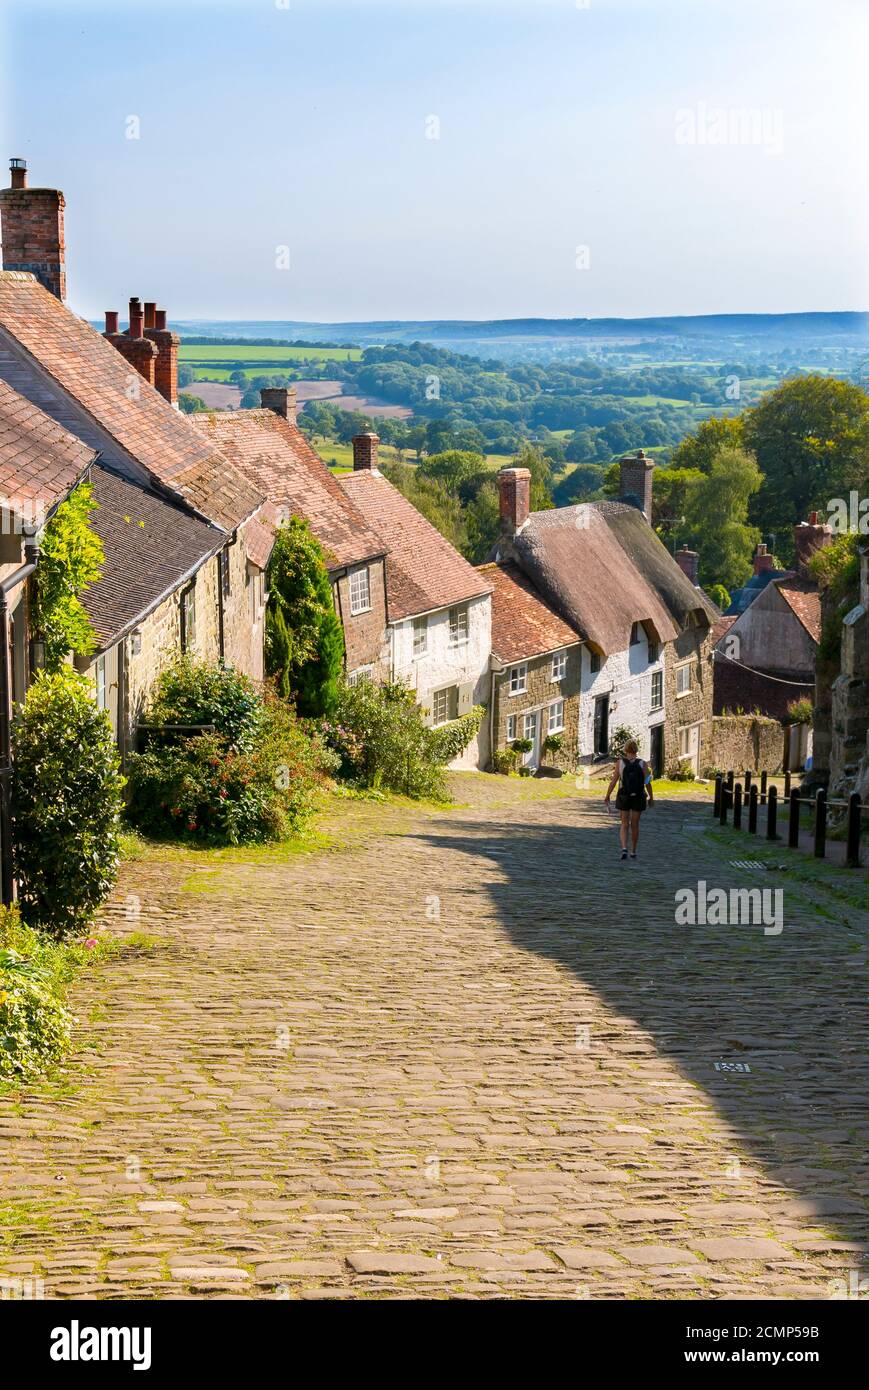 Gold Hill is a steep cobbled street in the town of Shaftesbury in the English county of Dorset. The view looking down from the top of the town. Stock Photo